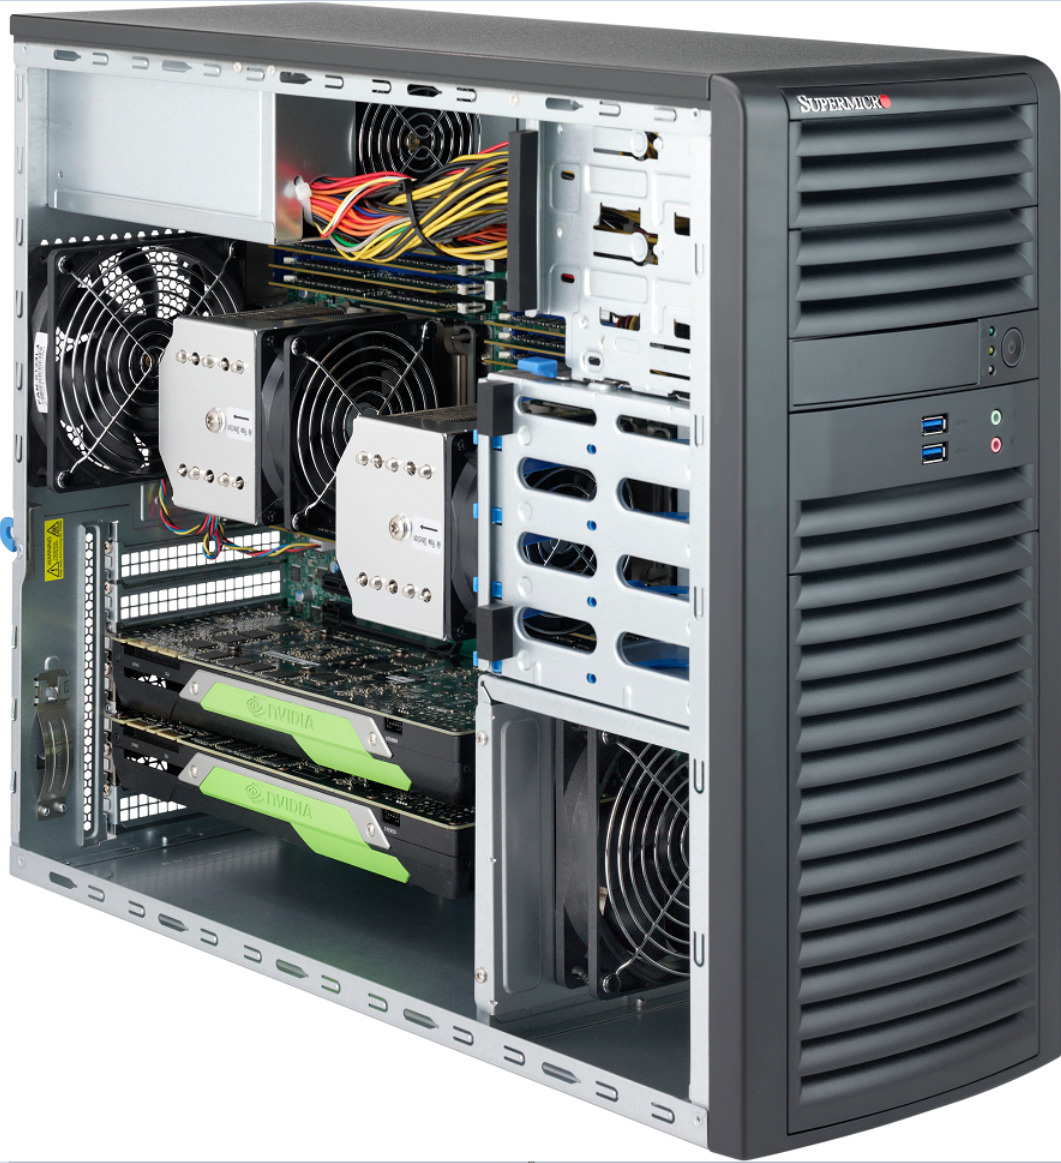 SuperMicro CSE-732D3-1K26B Mid Tower Chassis